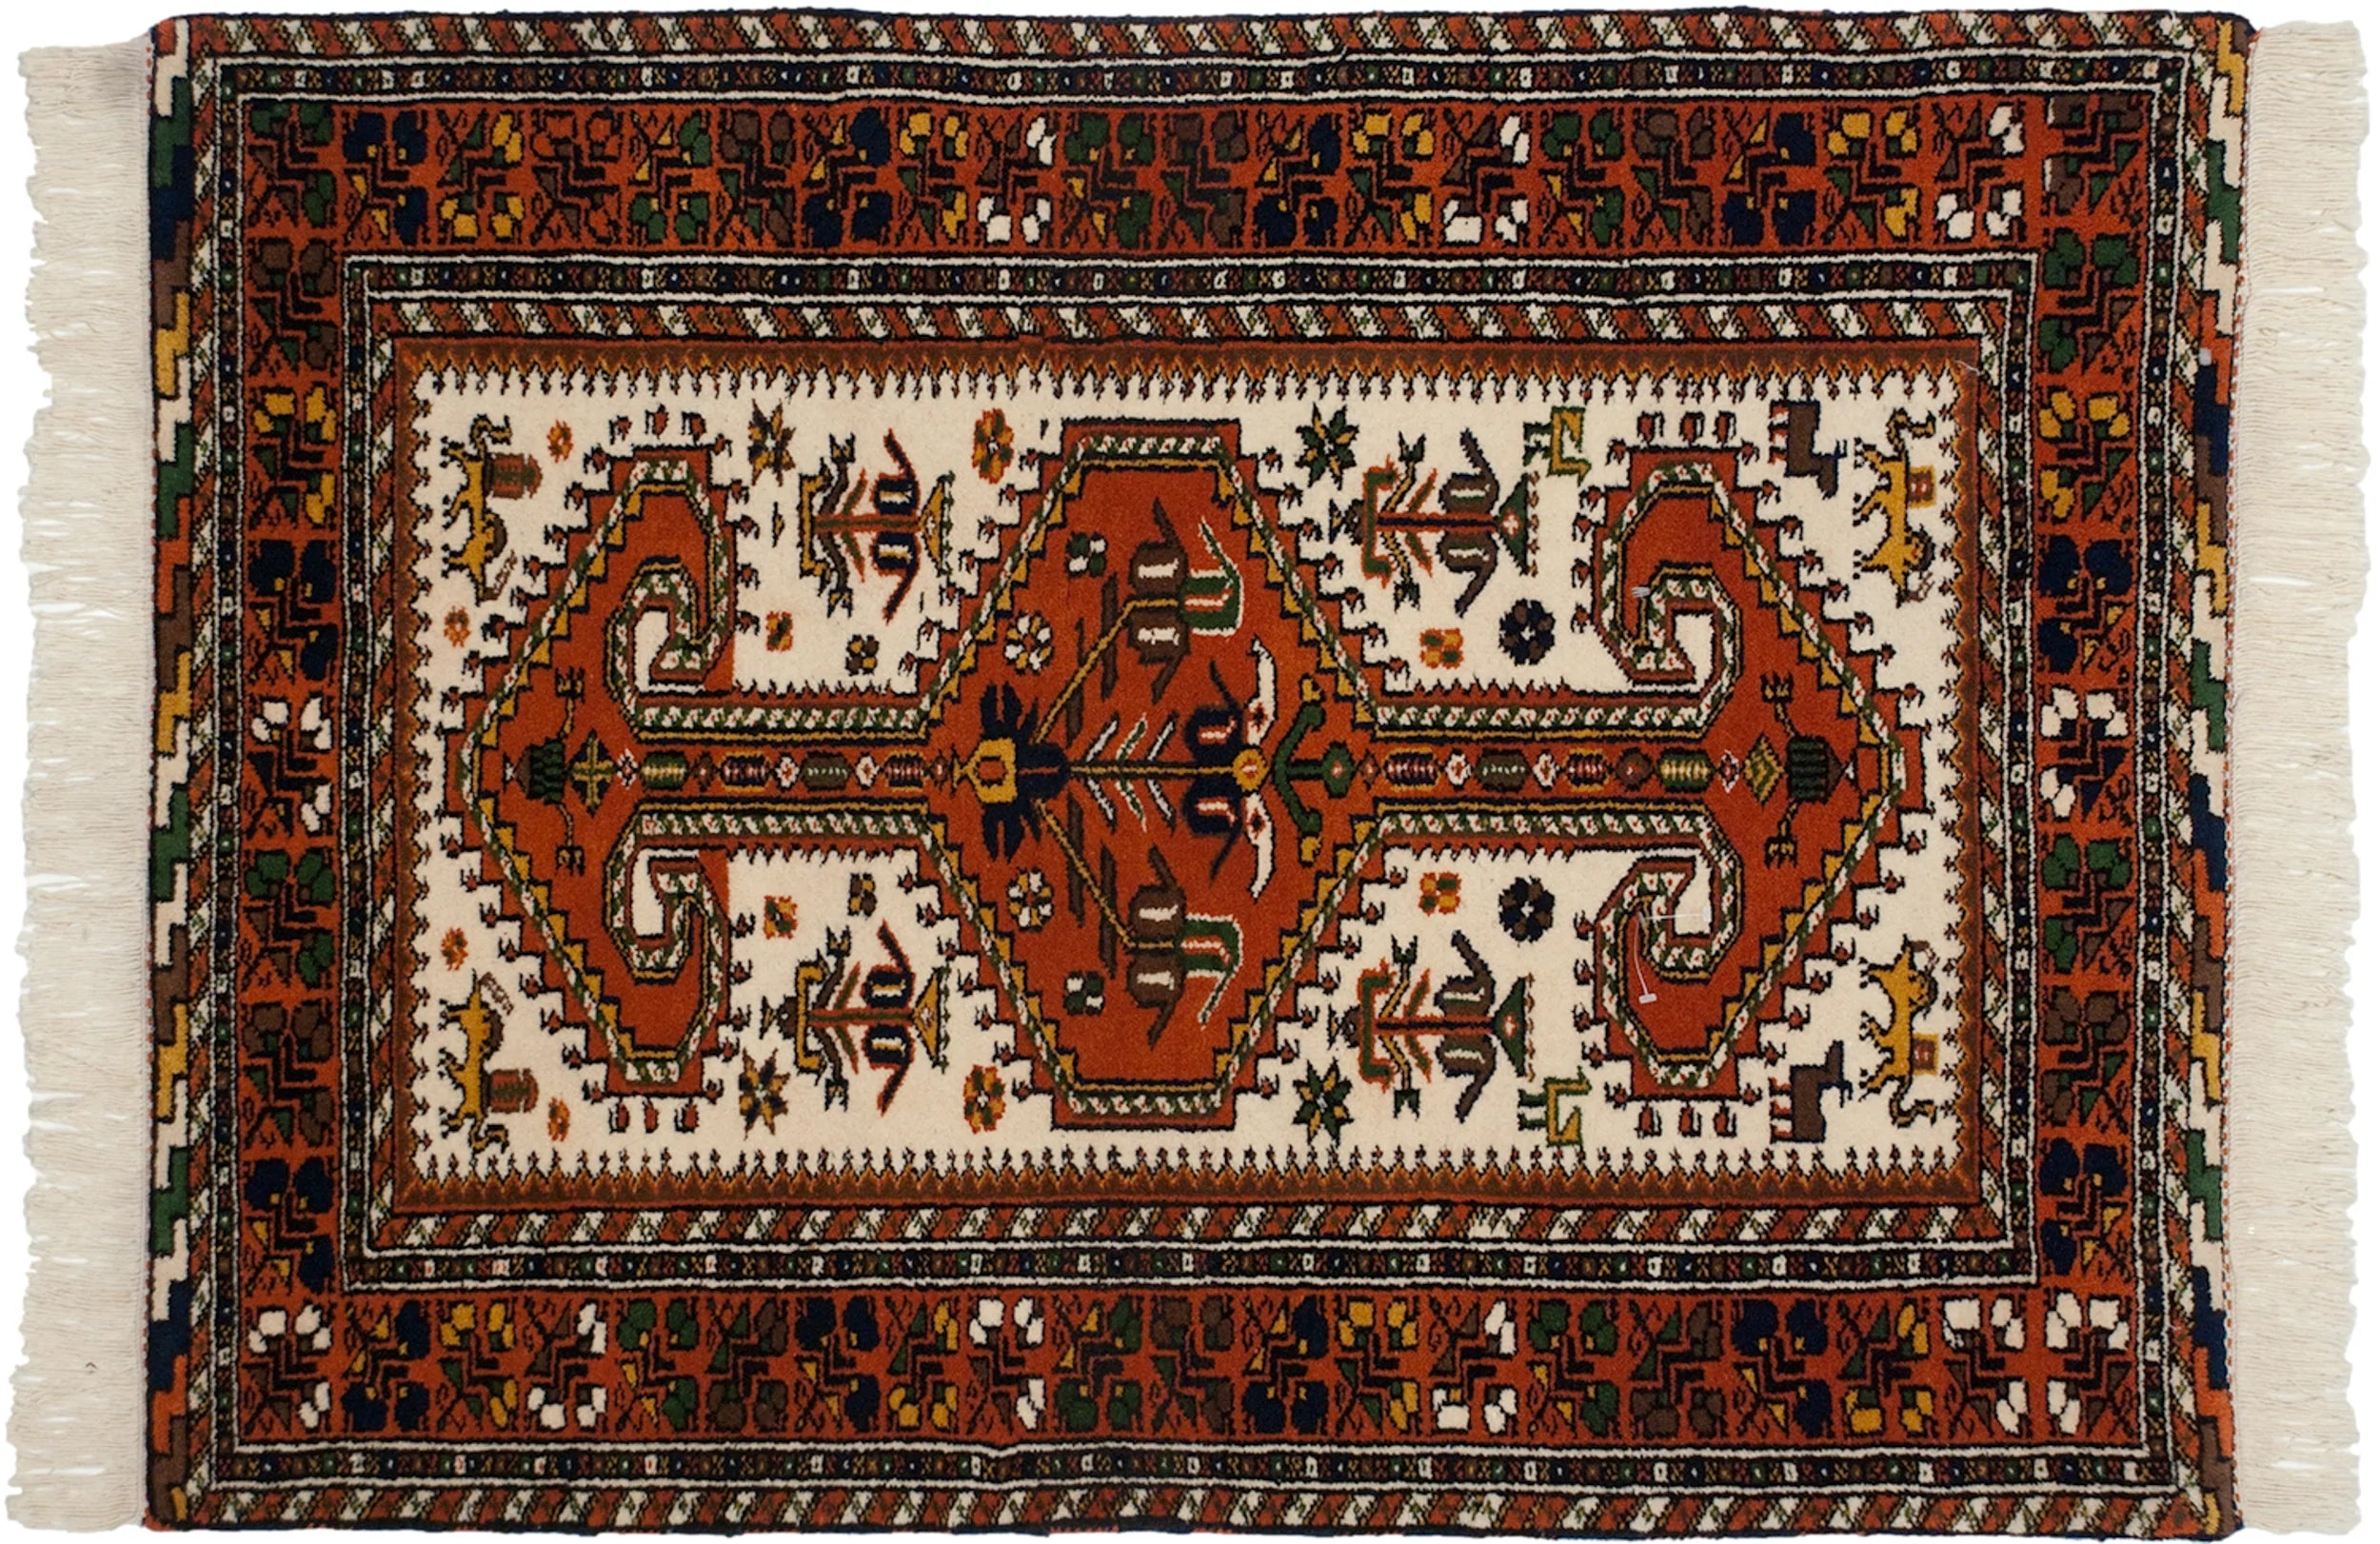 Antique Persian Malayer Rug 3' 4 x 5' 7 For Sale at 1stDibs